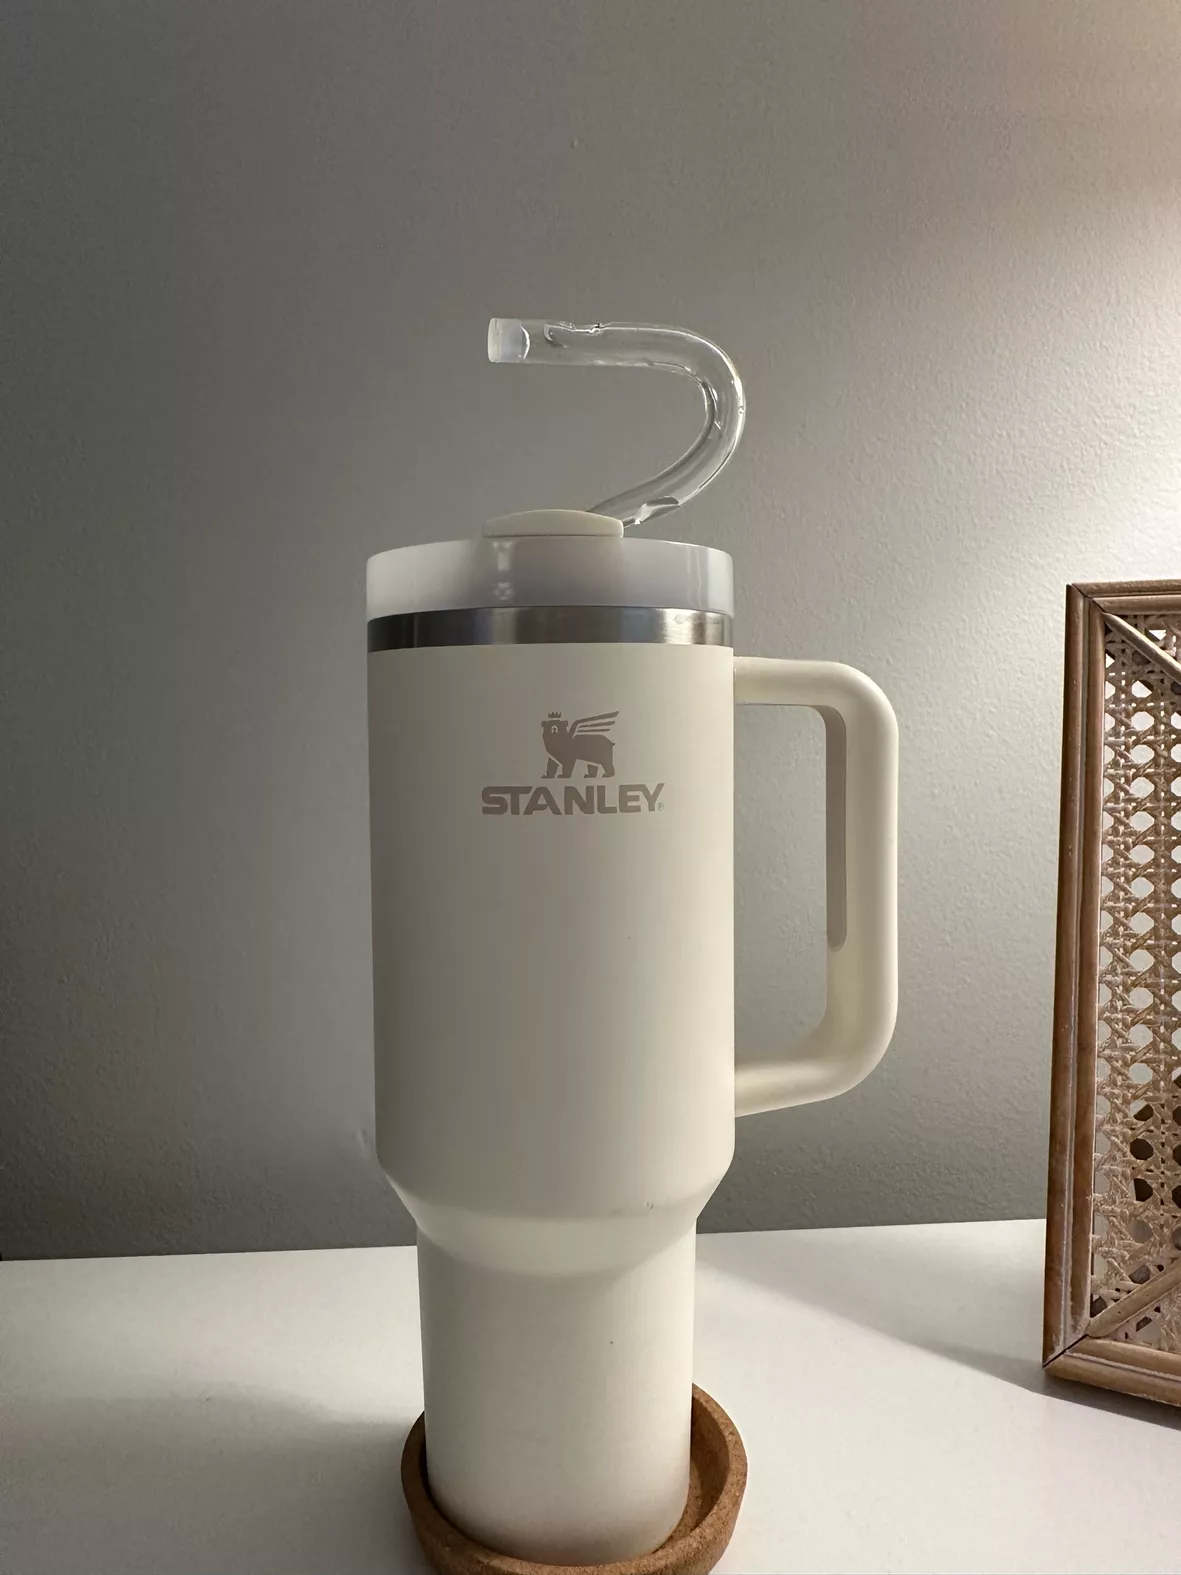 If you have a Stanley cup and want to avoid wrinkles you need this gla, No  Wrinkle Straw